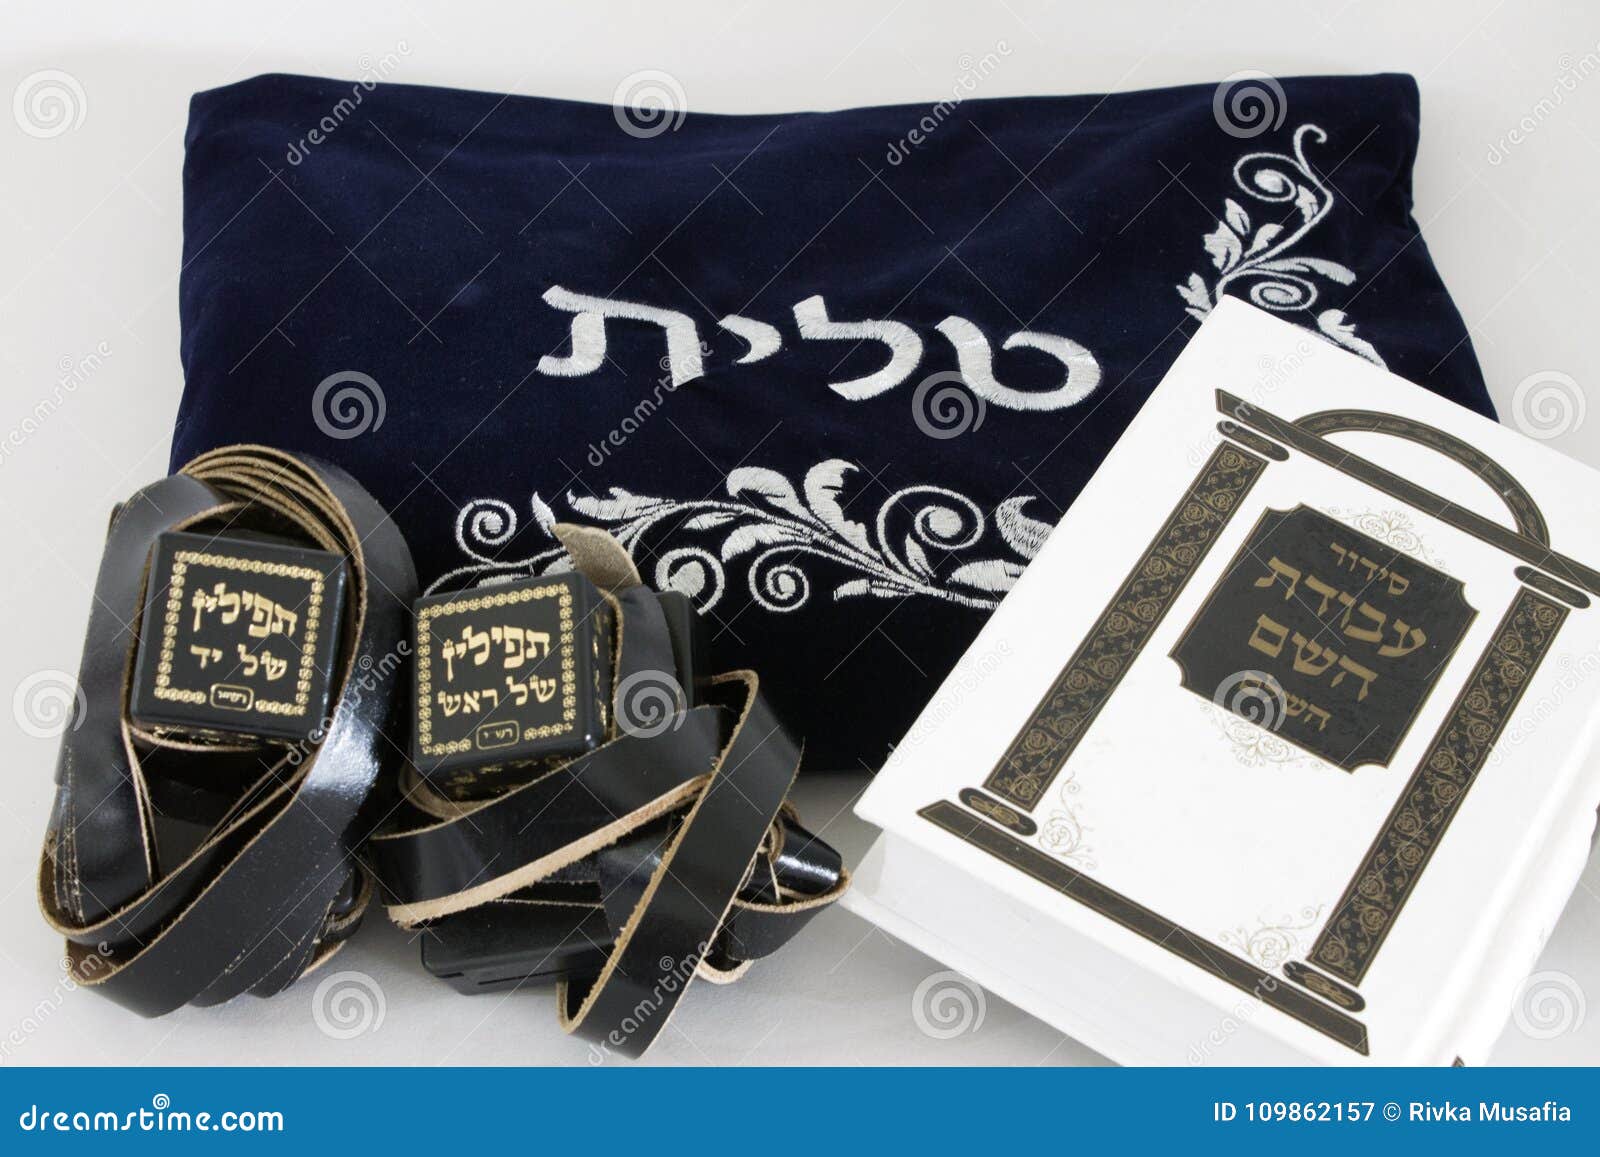 Bar Mitzvah Set: Talit Tefillin Sidur And Covers For Talit And